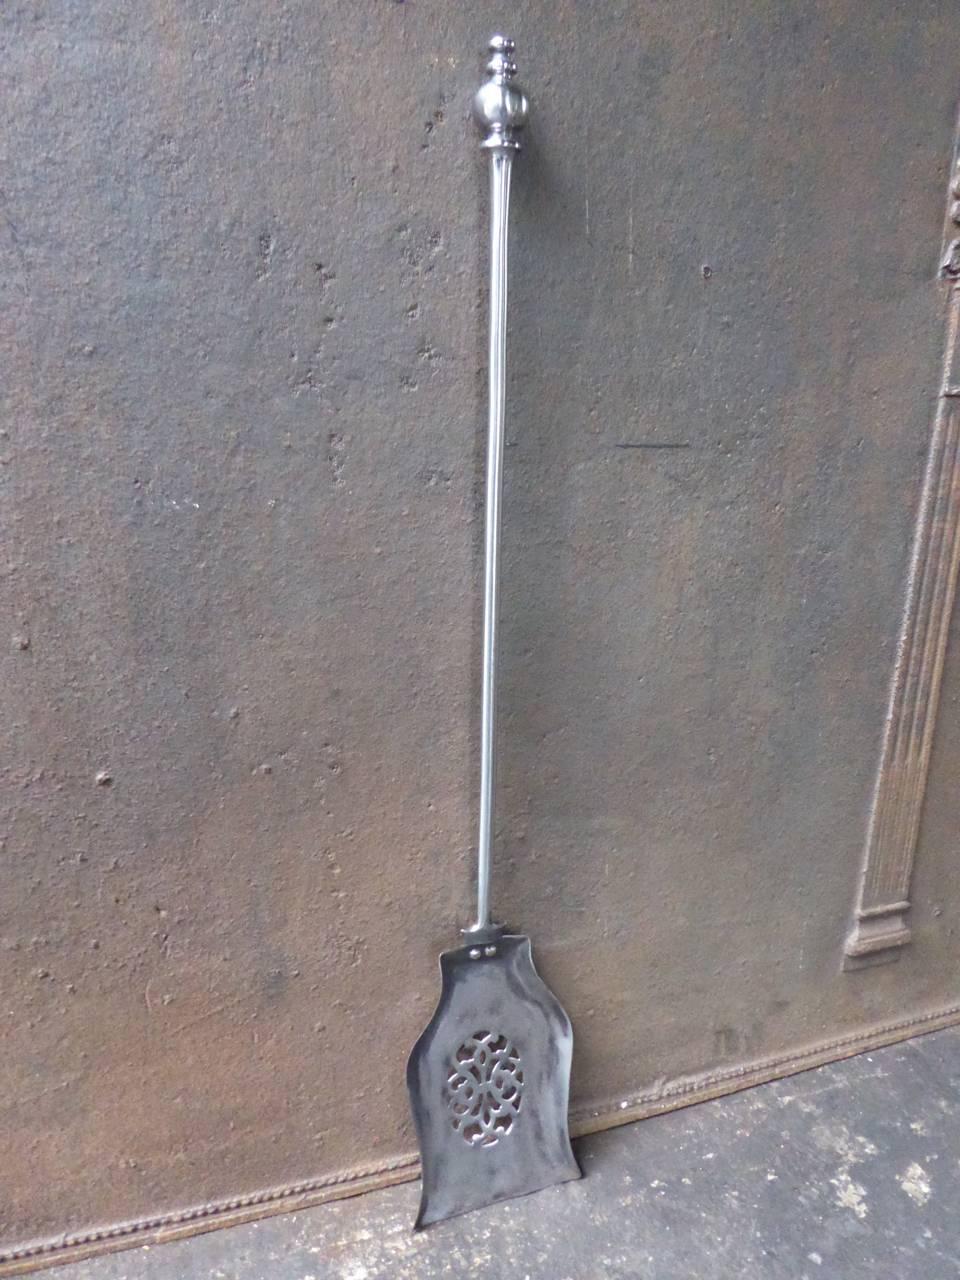 19th century English fire shovel made of polished steel.